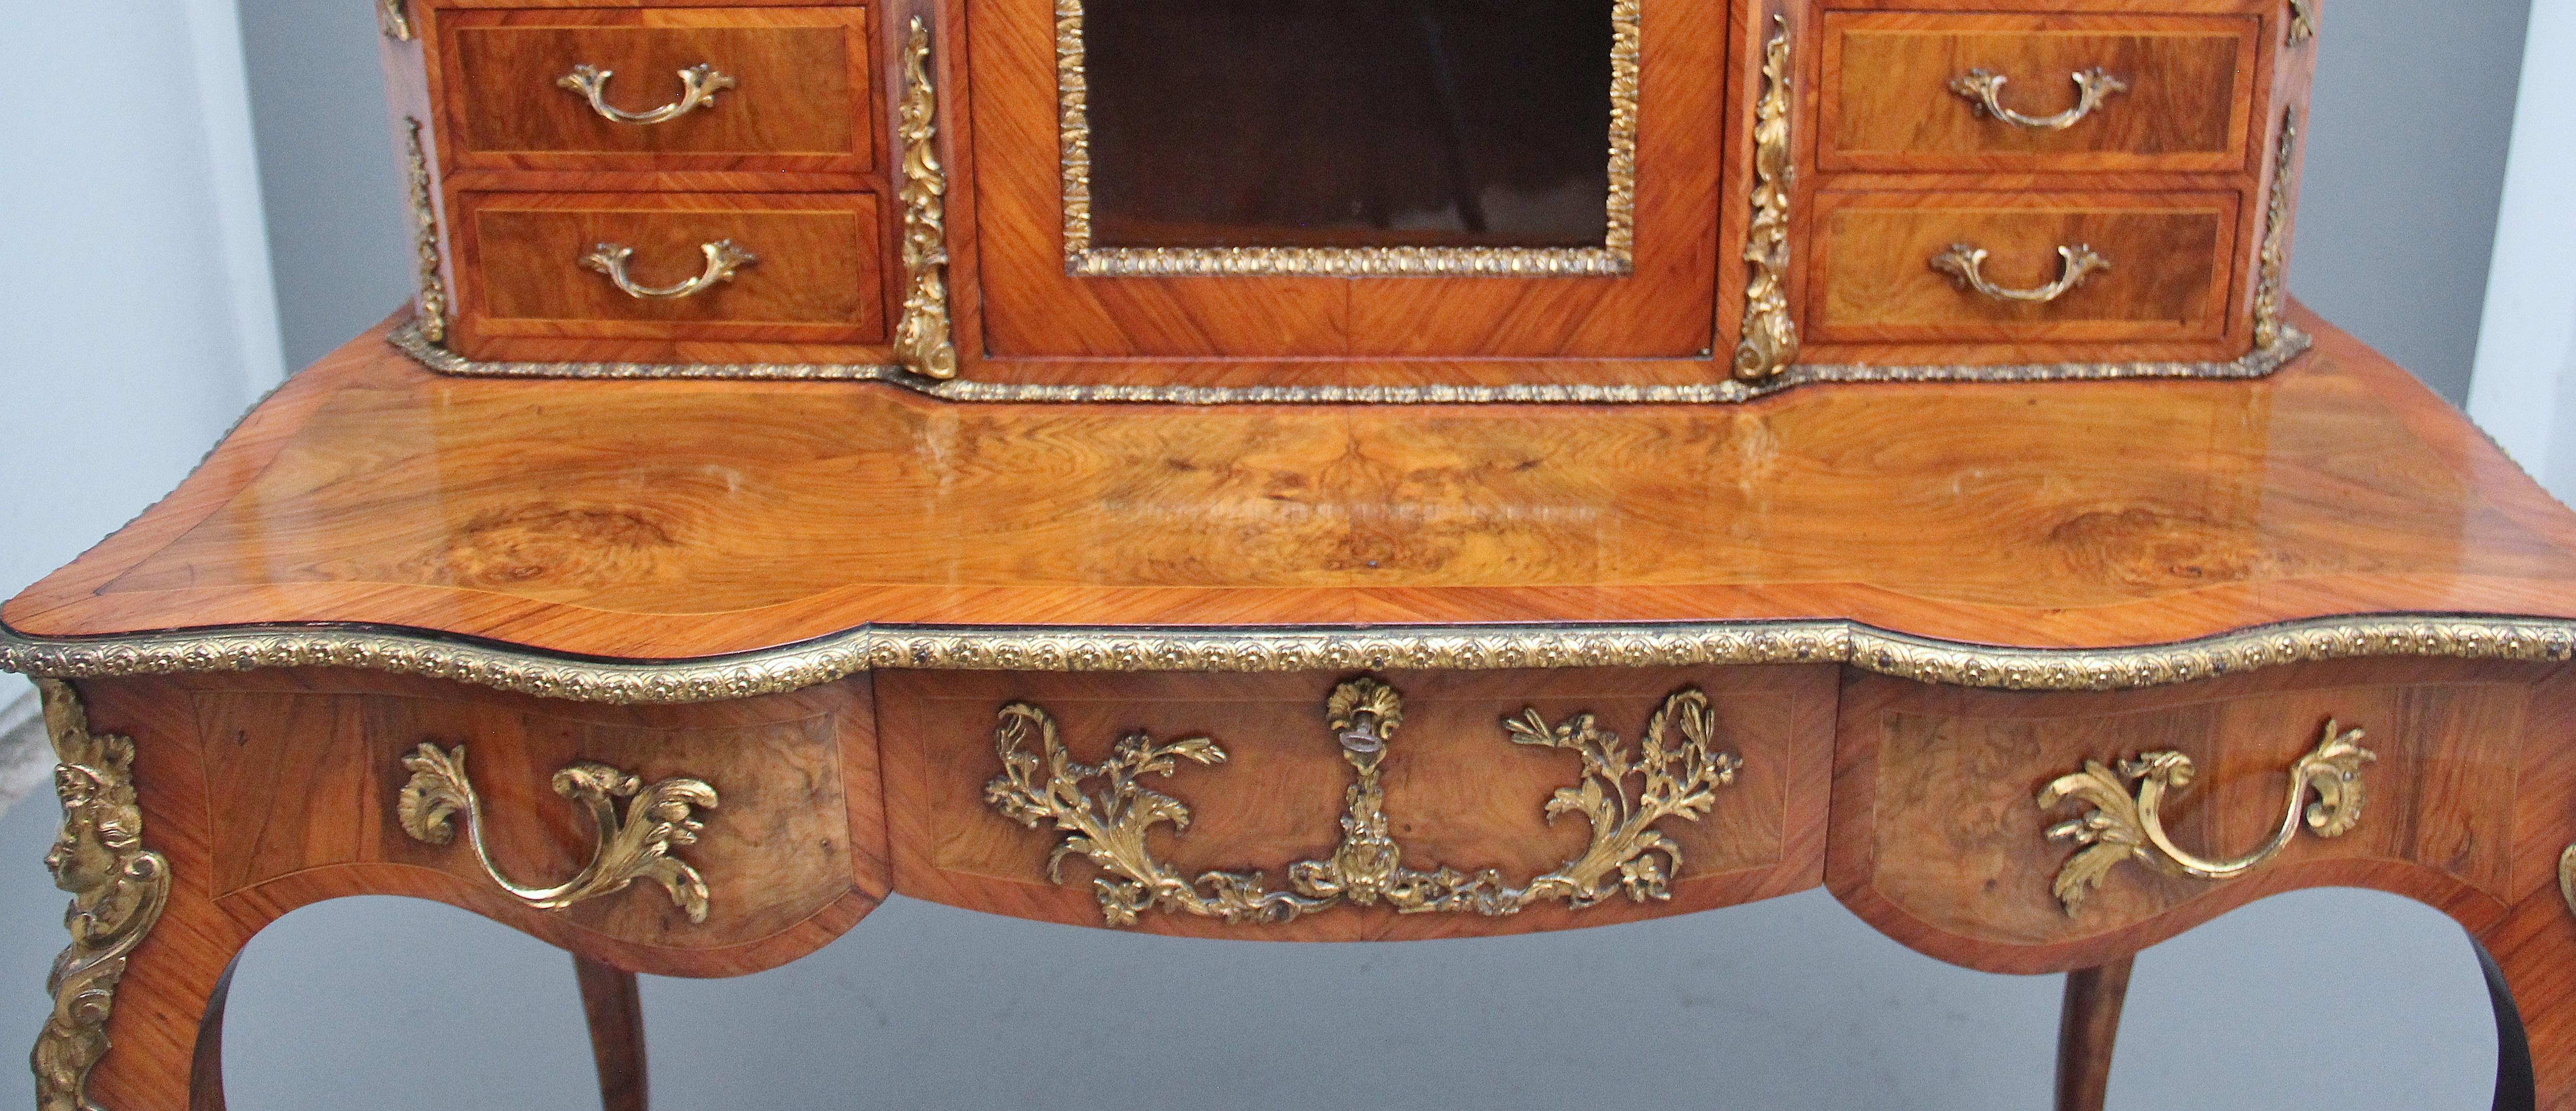 19th Century walnut desk by Gillows For Sale 9